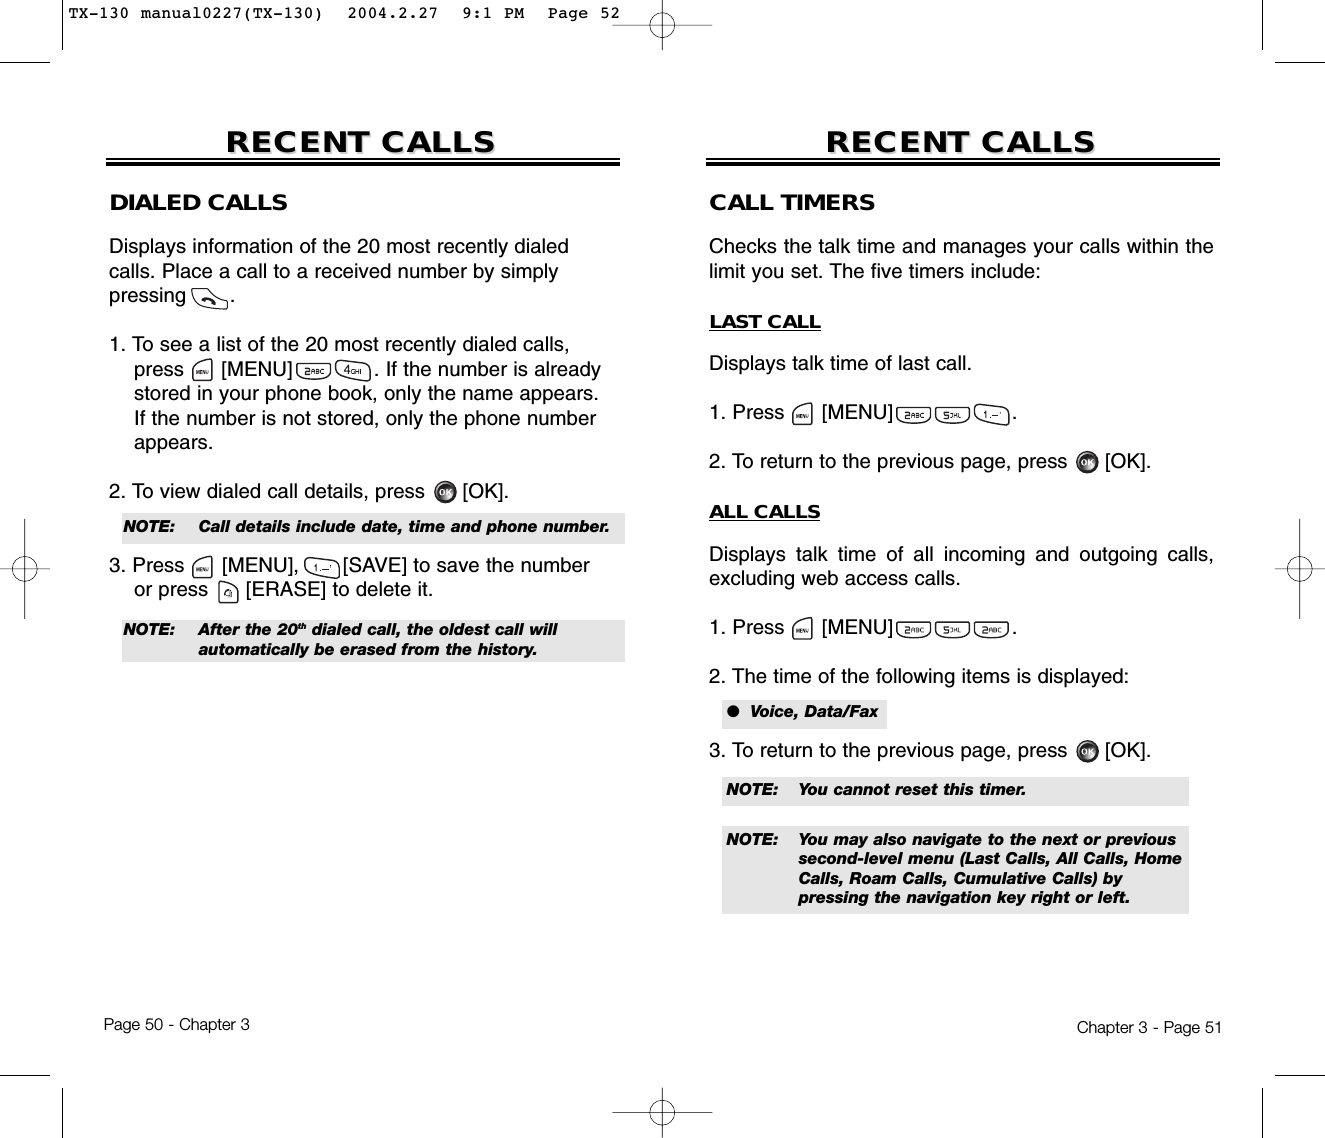 Chapter 3 - Page 51Page 50 - Chapter 3RECENT CALLSRECENT CALLS RECENT CALLSRECENT CALLSDIALED CALLSDisplays information of the 20 most recently dialed calls. Place a call to a received number by simply pressing       .1. To see a list of the 20 most recently dialed calls, press [MENU]             . If the number is already stored in your phone book, only the name appears. If the number is not stored, only the phone number appears.2. To view dialed call details, press [OK].3. Press [MENU], [SAVE] to save the numberor press [ERASE] to delete it.NOTE:  Call details include date, time and phone number.NOTE:  After the 20th dialed call, the oldest call will automatically be erased from the history.CALL TIMERSChecks the talk time and manages your calls within thelimit you set. The five timers include:LAST CALLDisplays talk time of last call.1. Press      [MENU]                   .2. To return to the previous page, press      [OK].ALL CALLSDisplays talk time of all incoming and outgoing calls,excluding web access calls.1. Press      [MENU]                   .2. The time of the following items is displayed:3. To return to the previous page, press      [OK].●  Voice, Data/FaxNOTE: You cannot reset this timer.NOTE: You may also navigate to the next or previous second-level menu (Last Calls, All Calls, Home Calls, Roam Calls, Cumulative Calls) by pressing the navigation key right or left.TX-130 manual0227(TX-130)  2004.2.27  9:1 PM  Page 52